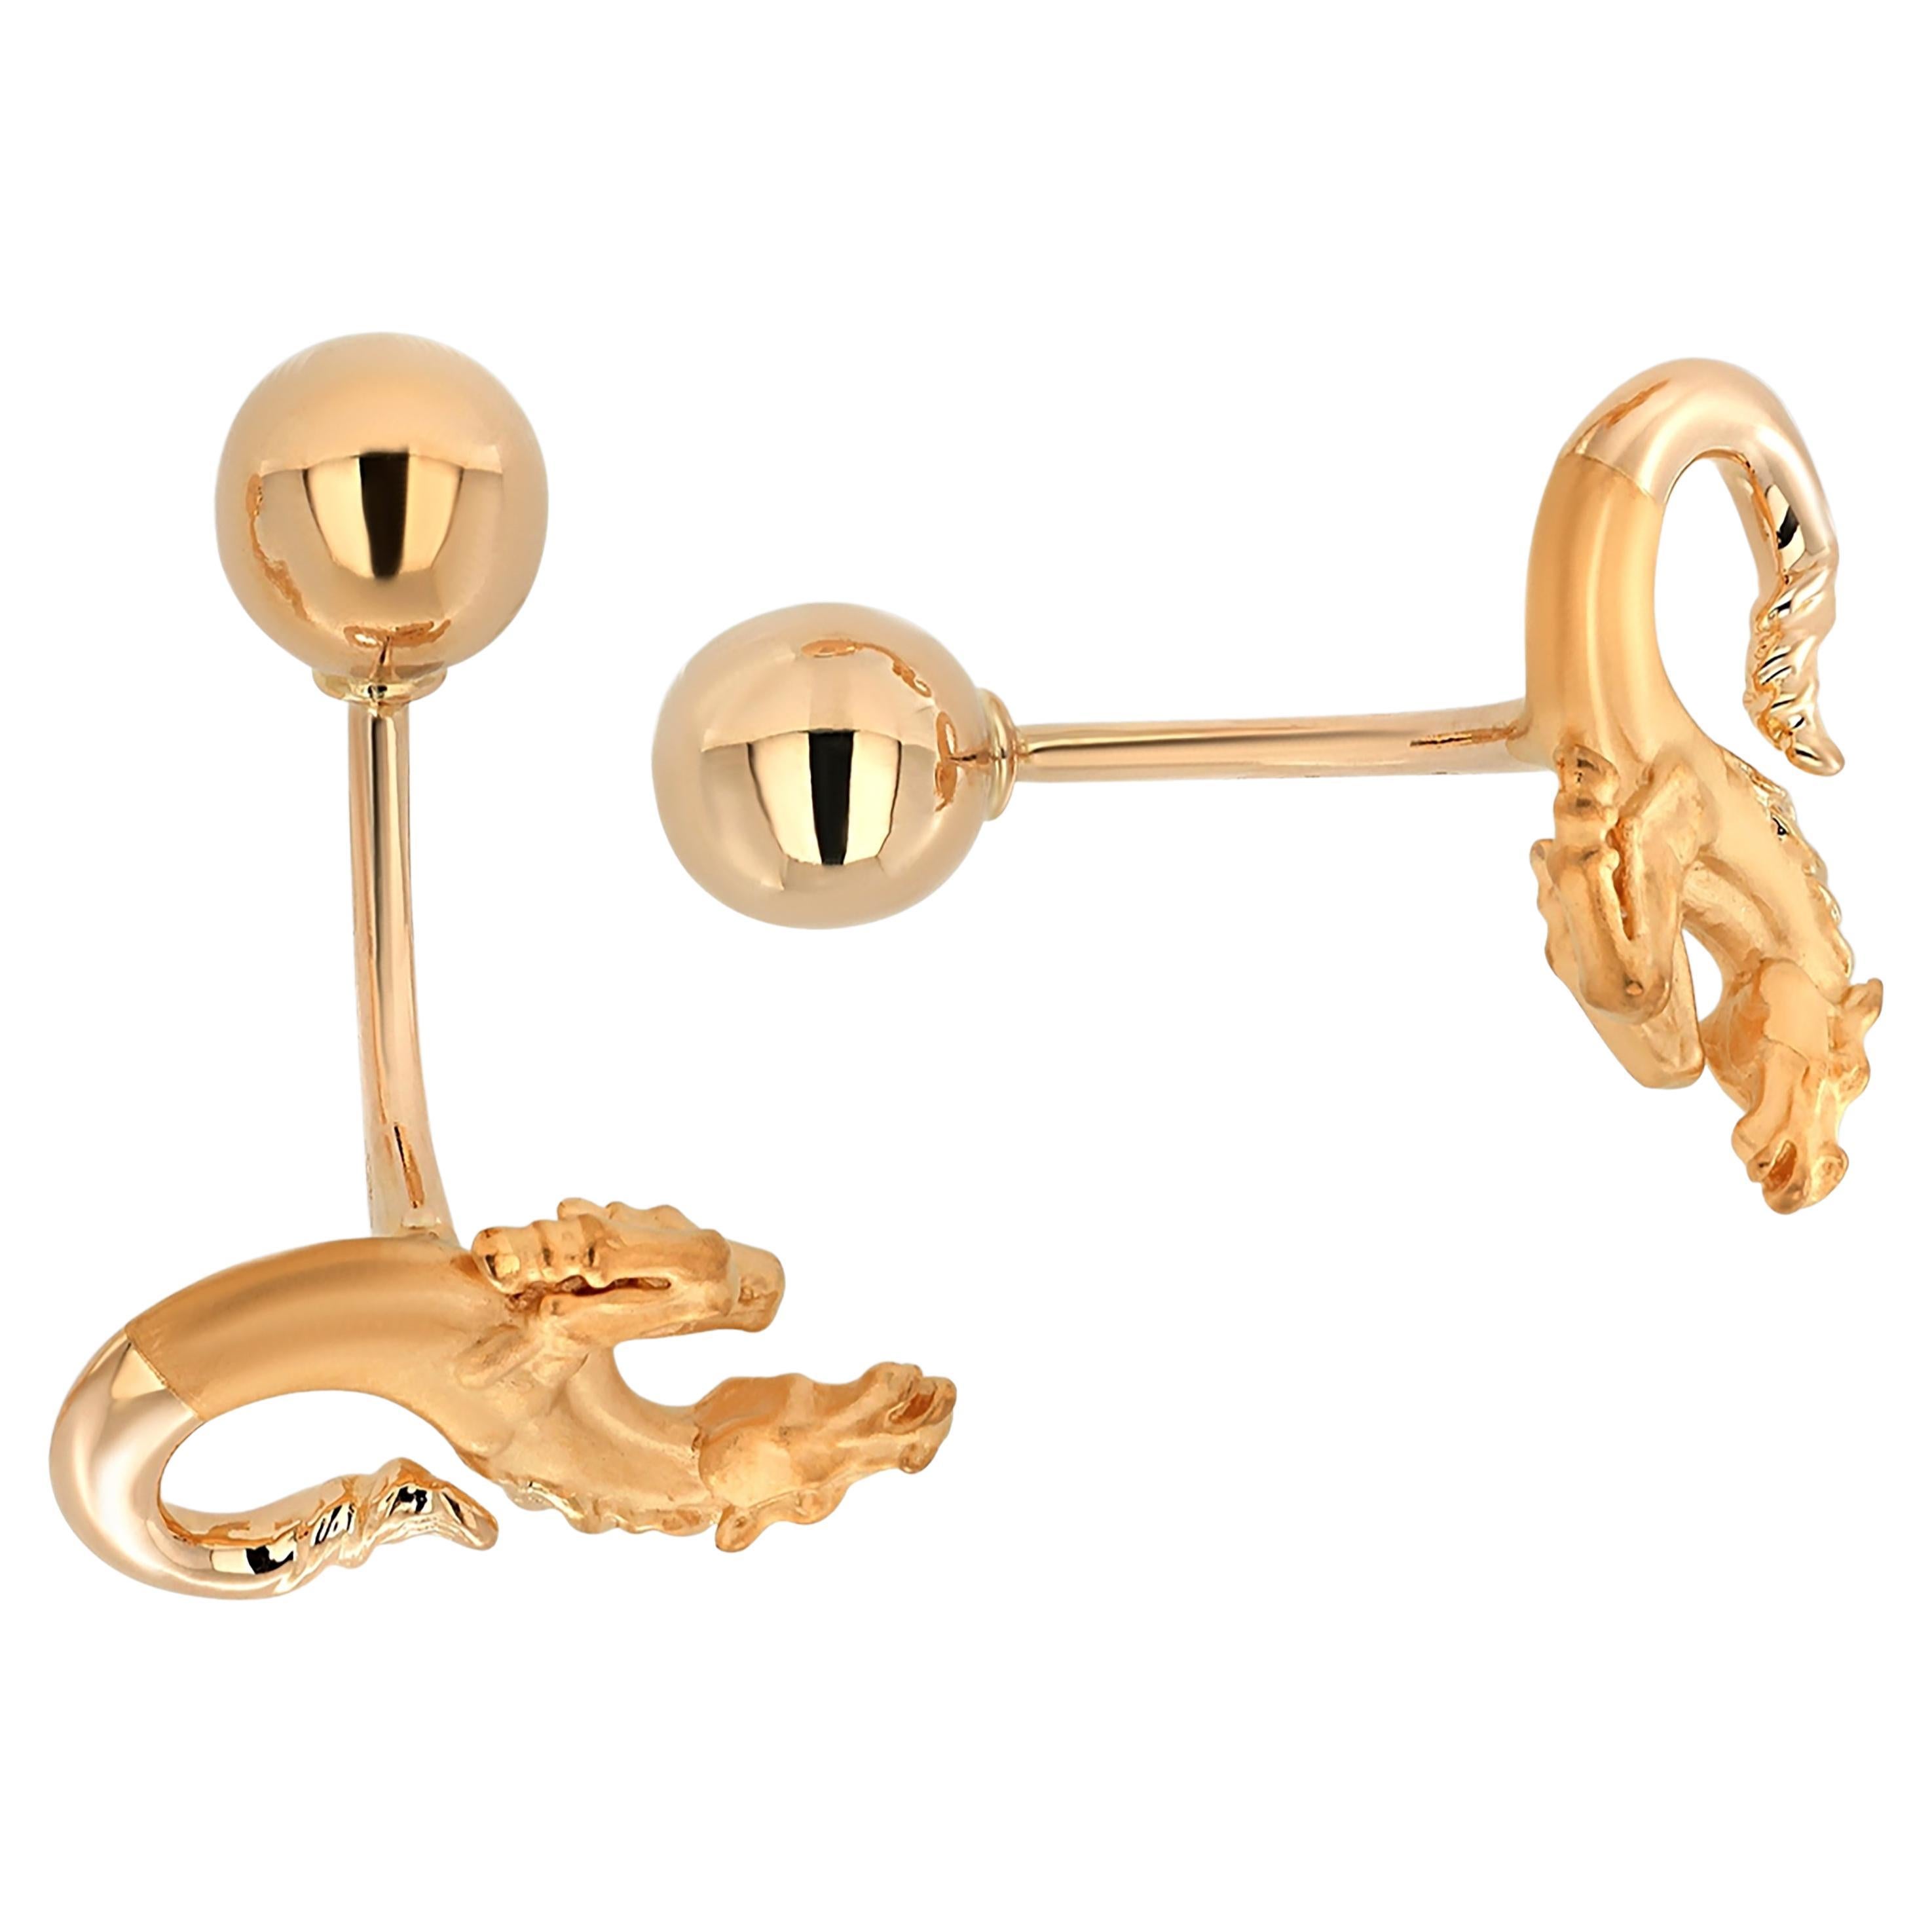 Carrera y Carrera Vintage 18 Karat Gold Leaping Horse 0.75 Inch Cufflinks 132643 For Sale